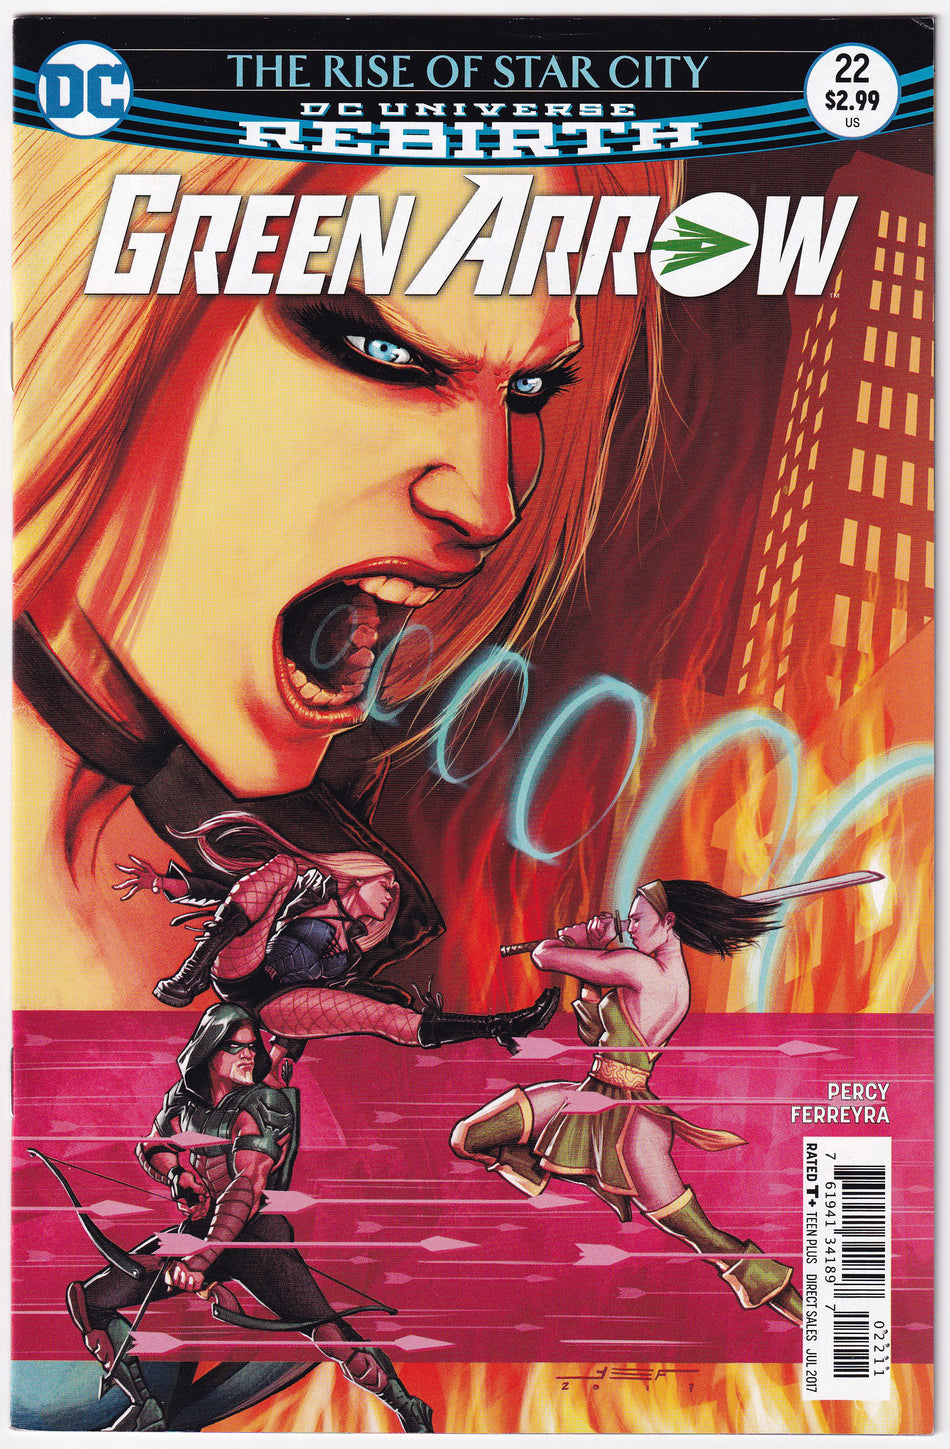 Photo of Green Arrow Vol. 6 (2017)  Issue 22A  Near Mint Comic sold by Stronghold Collectibles